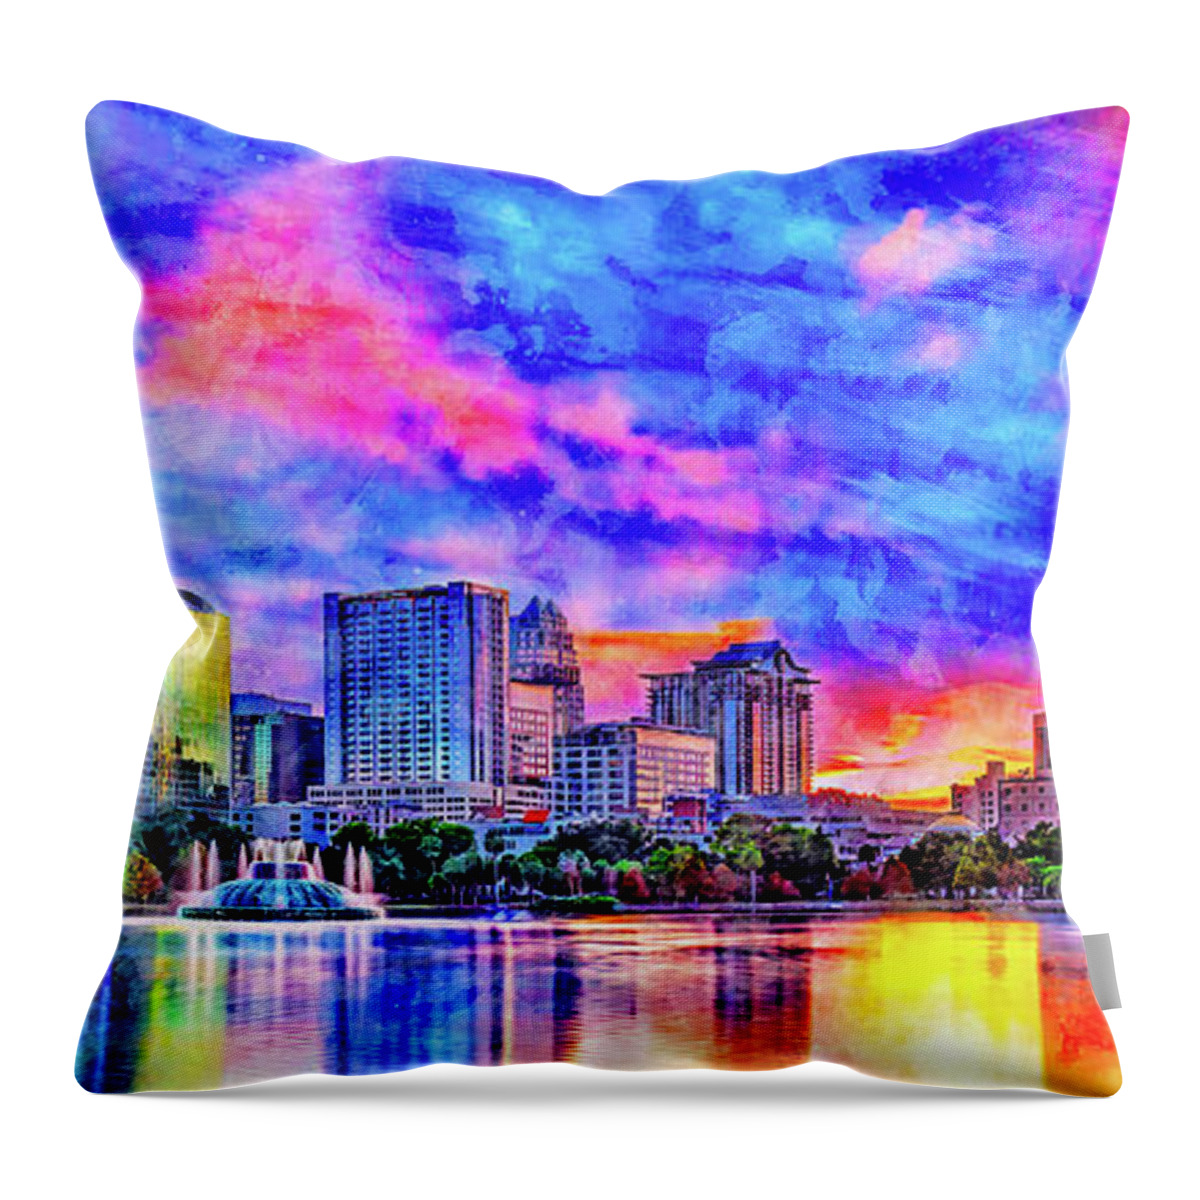 Downtown Orlando Throw Pillow featuring the digital art Skyline of downtown Orlando, Florida, seen at sunset from lake Eola - ink and watercolor by Nicko Prints